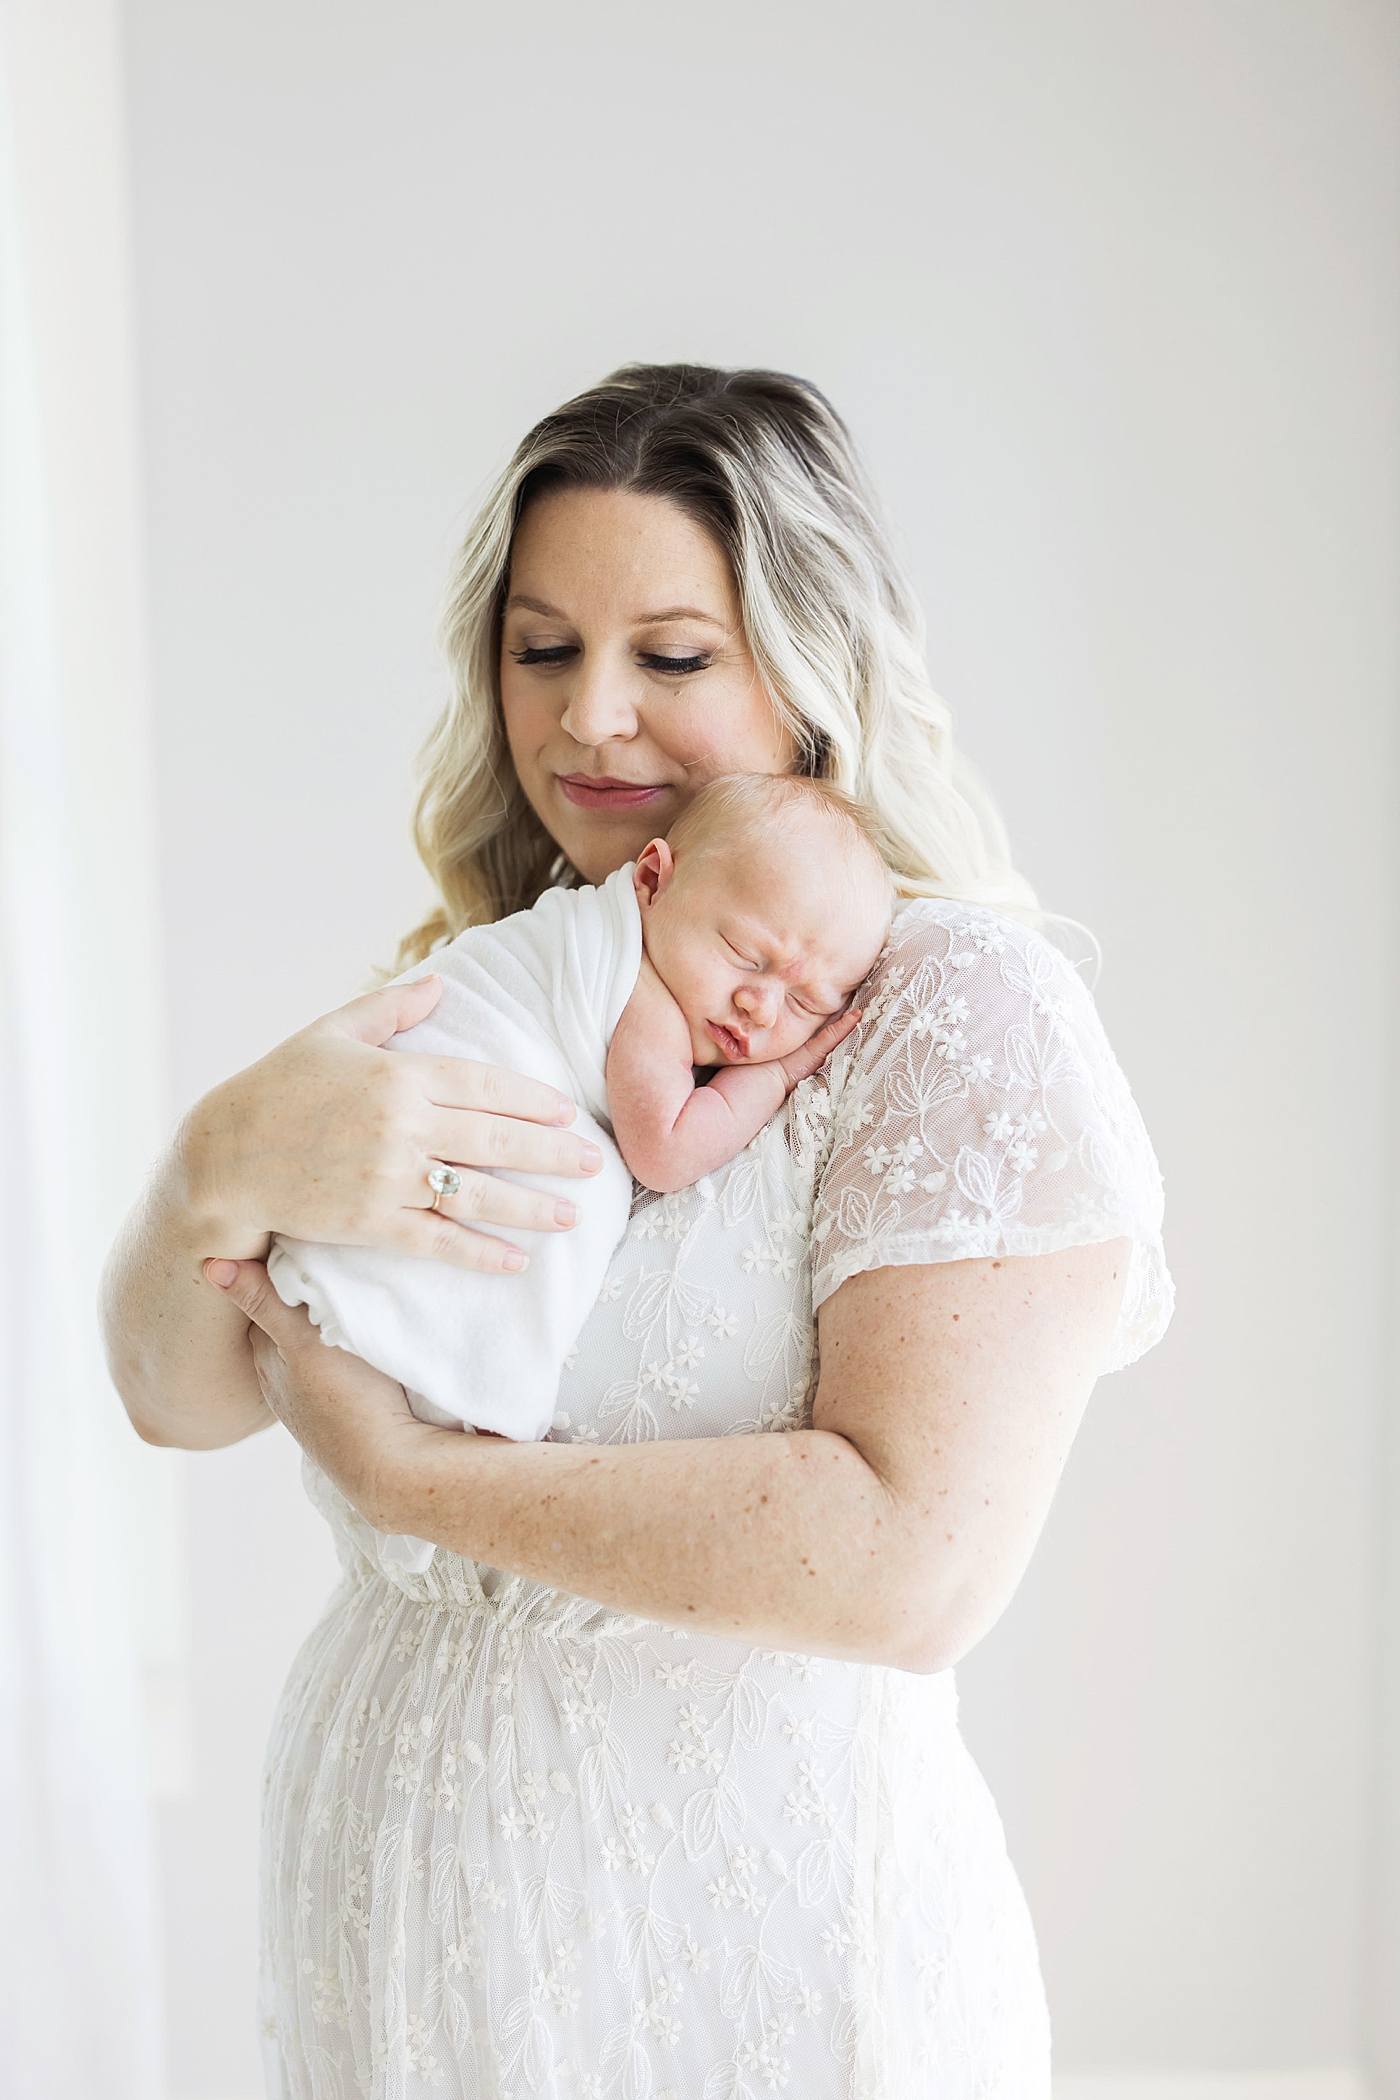 Baby boy curled up on Moms shoulder during newborn session. Photo by Fresh Light Photography.